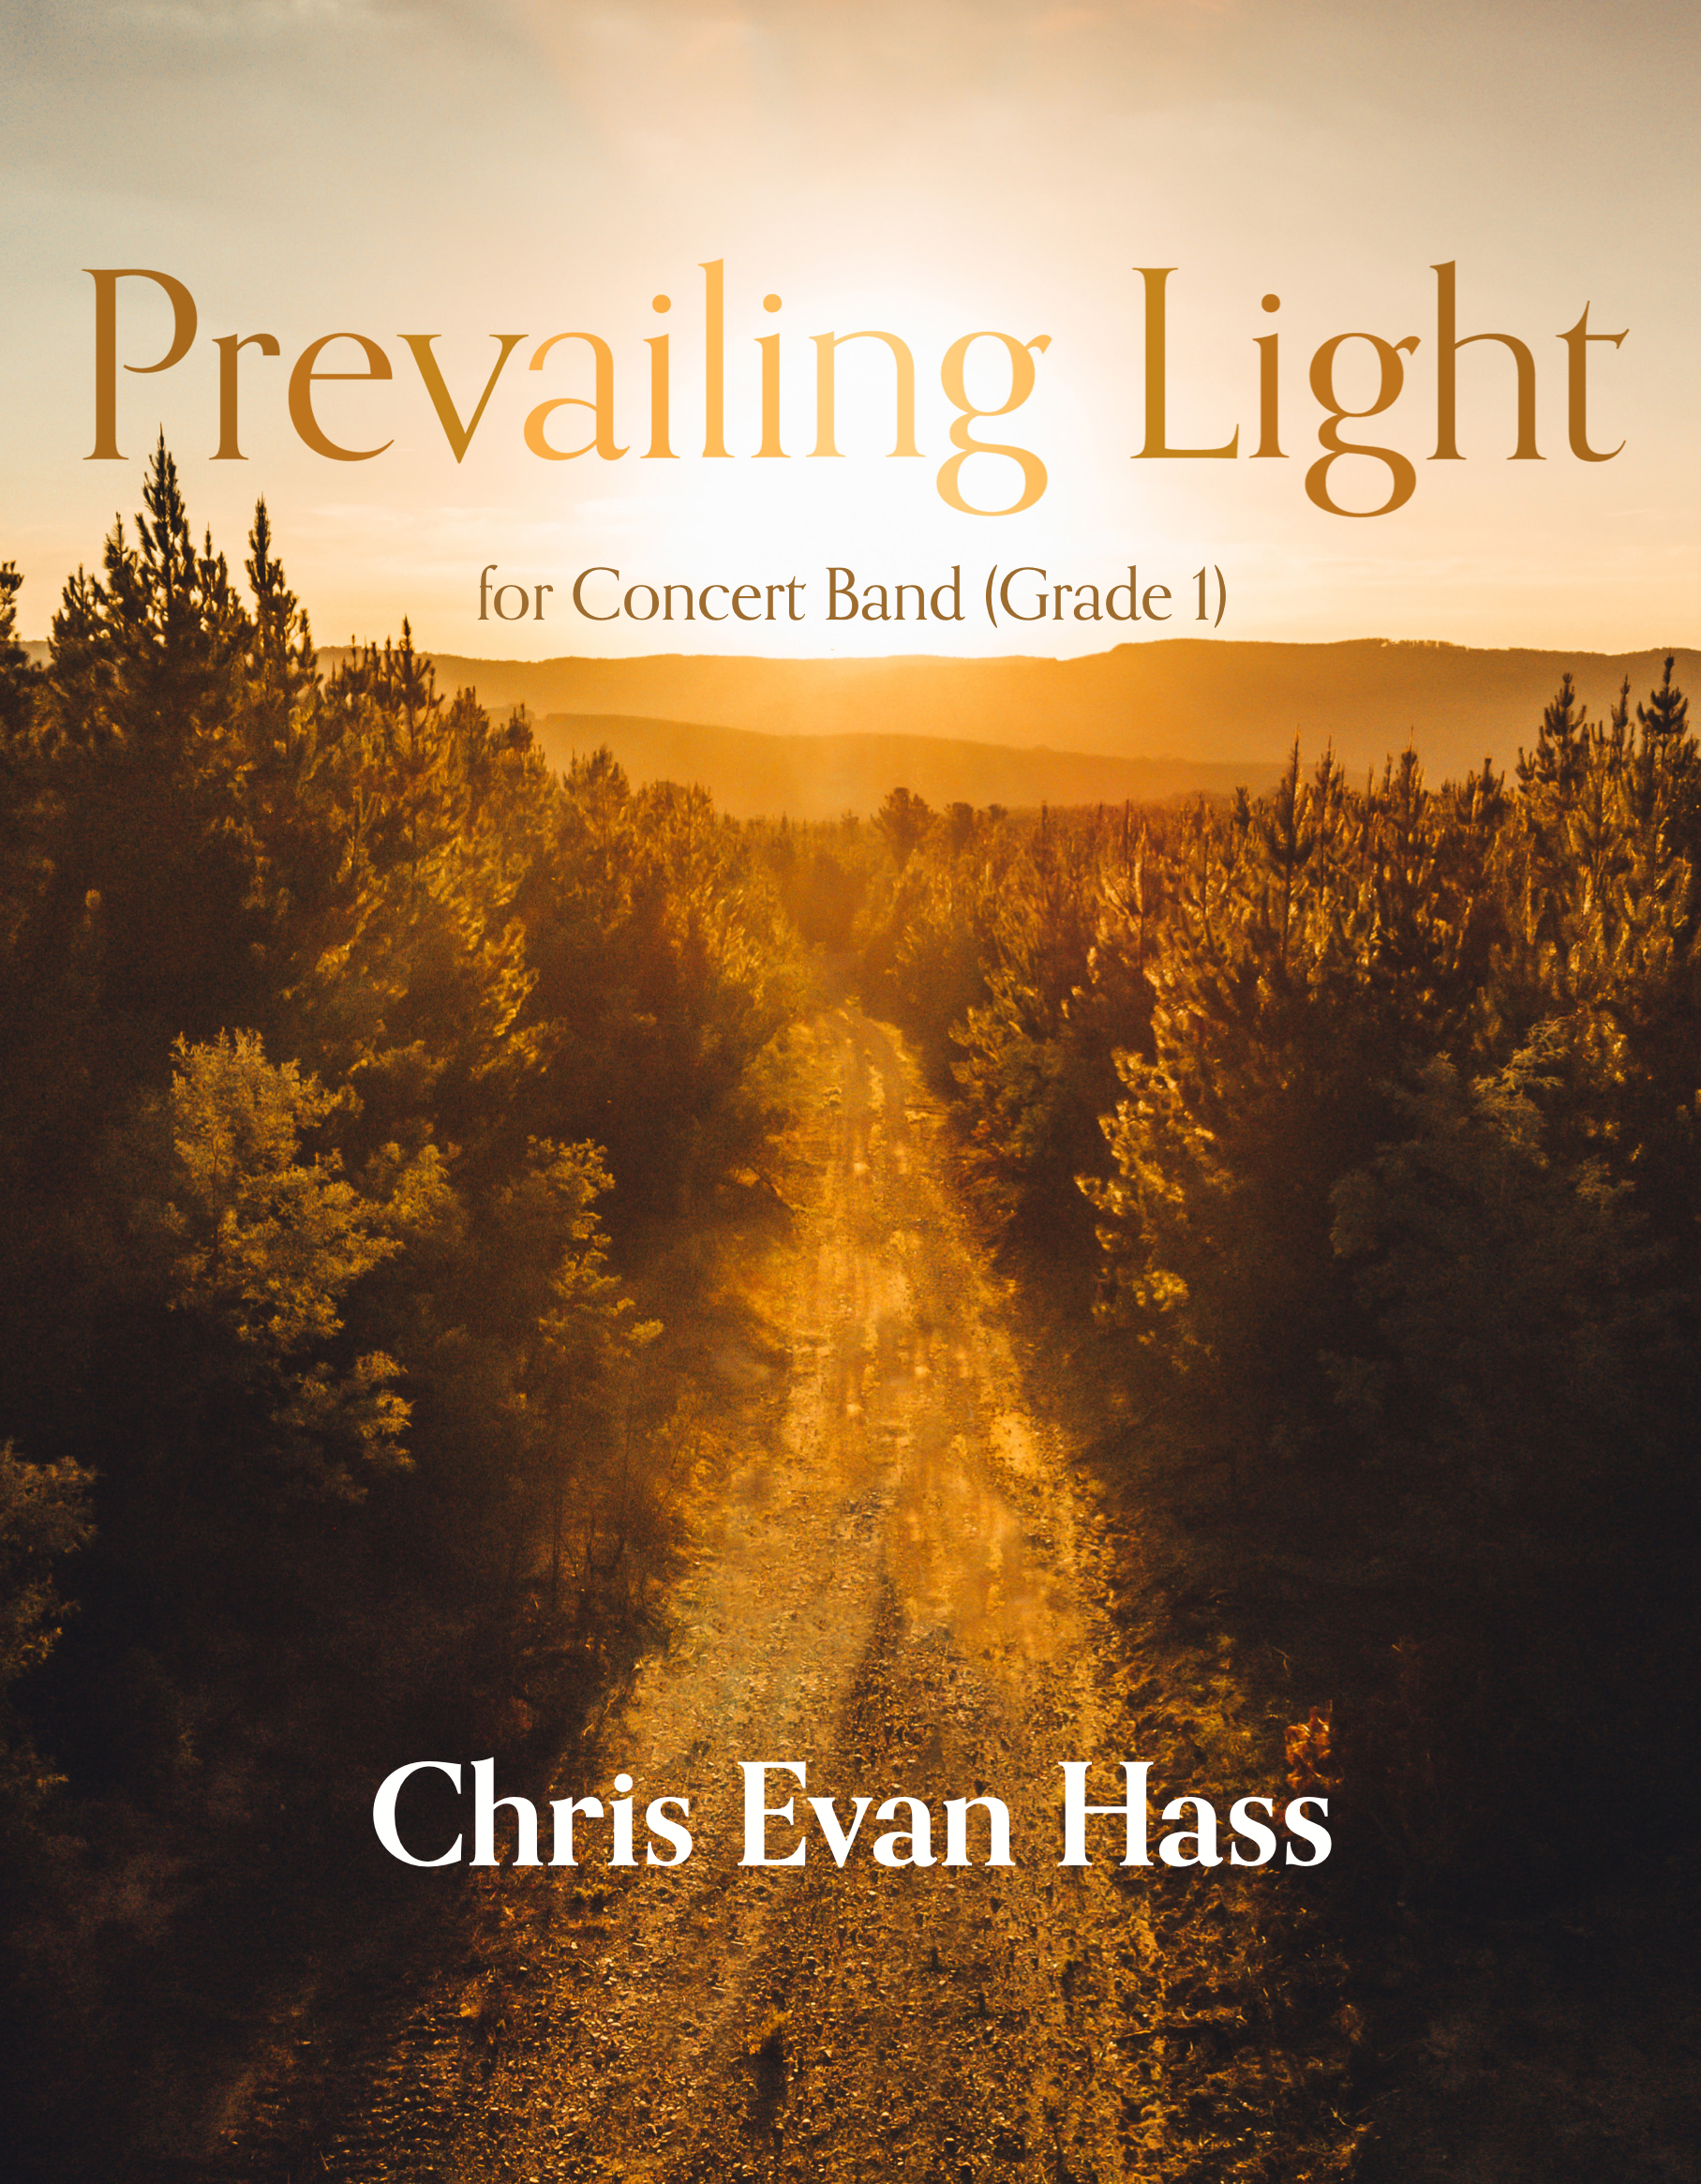 Prevailing Light by Chris Evan Hass